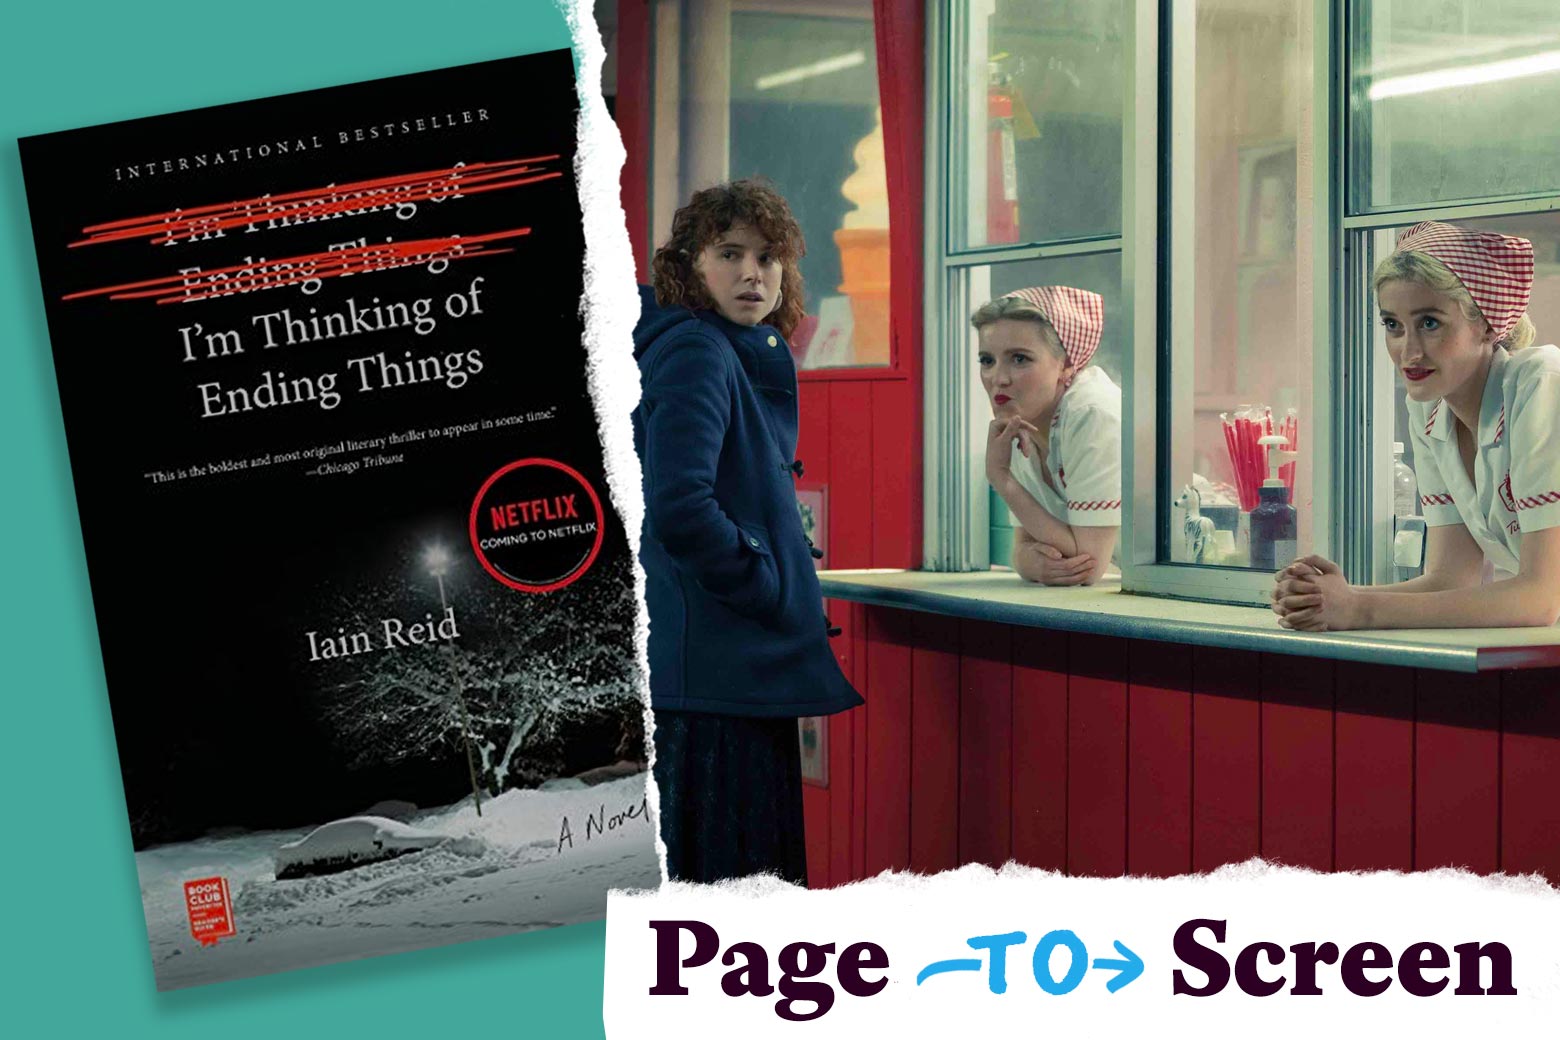 The book cover of I'm Thinking of Ending Things, and a scene from the film, with the Page to Screen tearaway